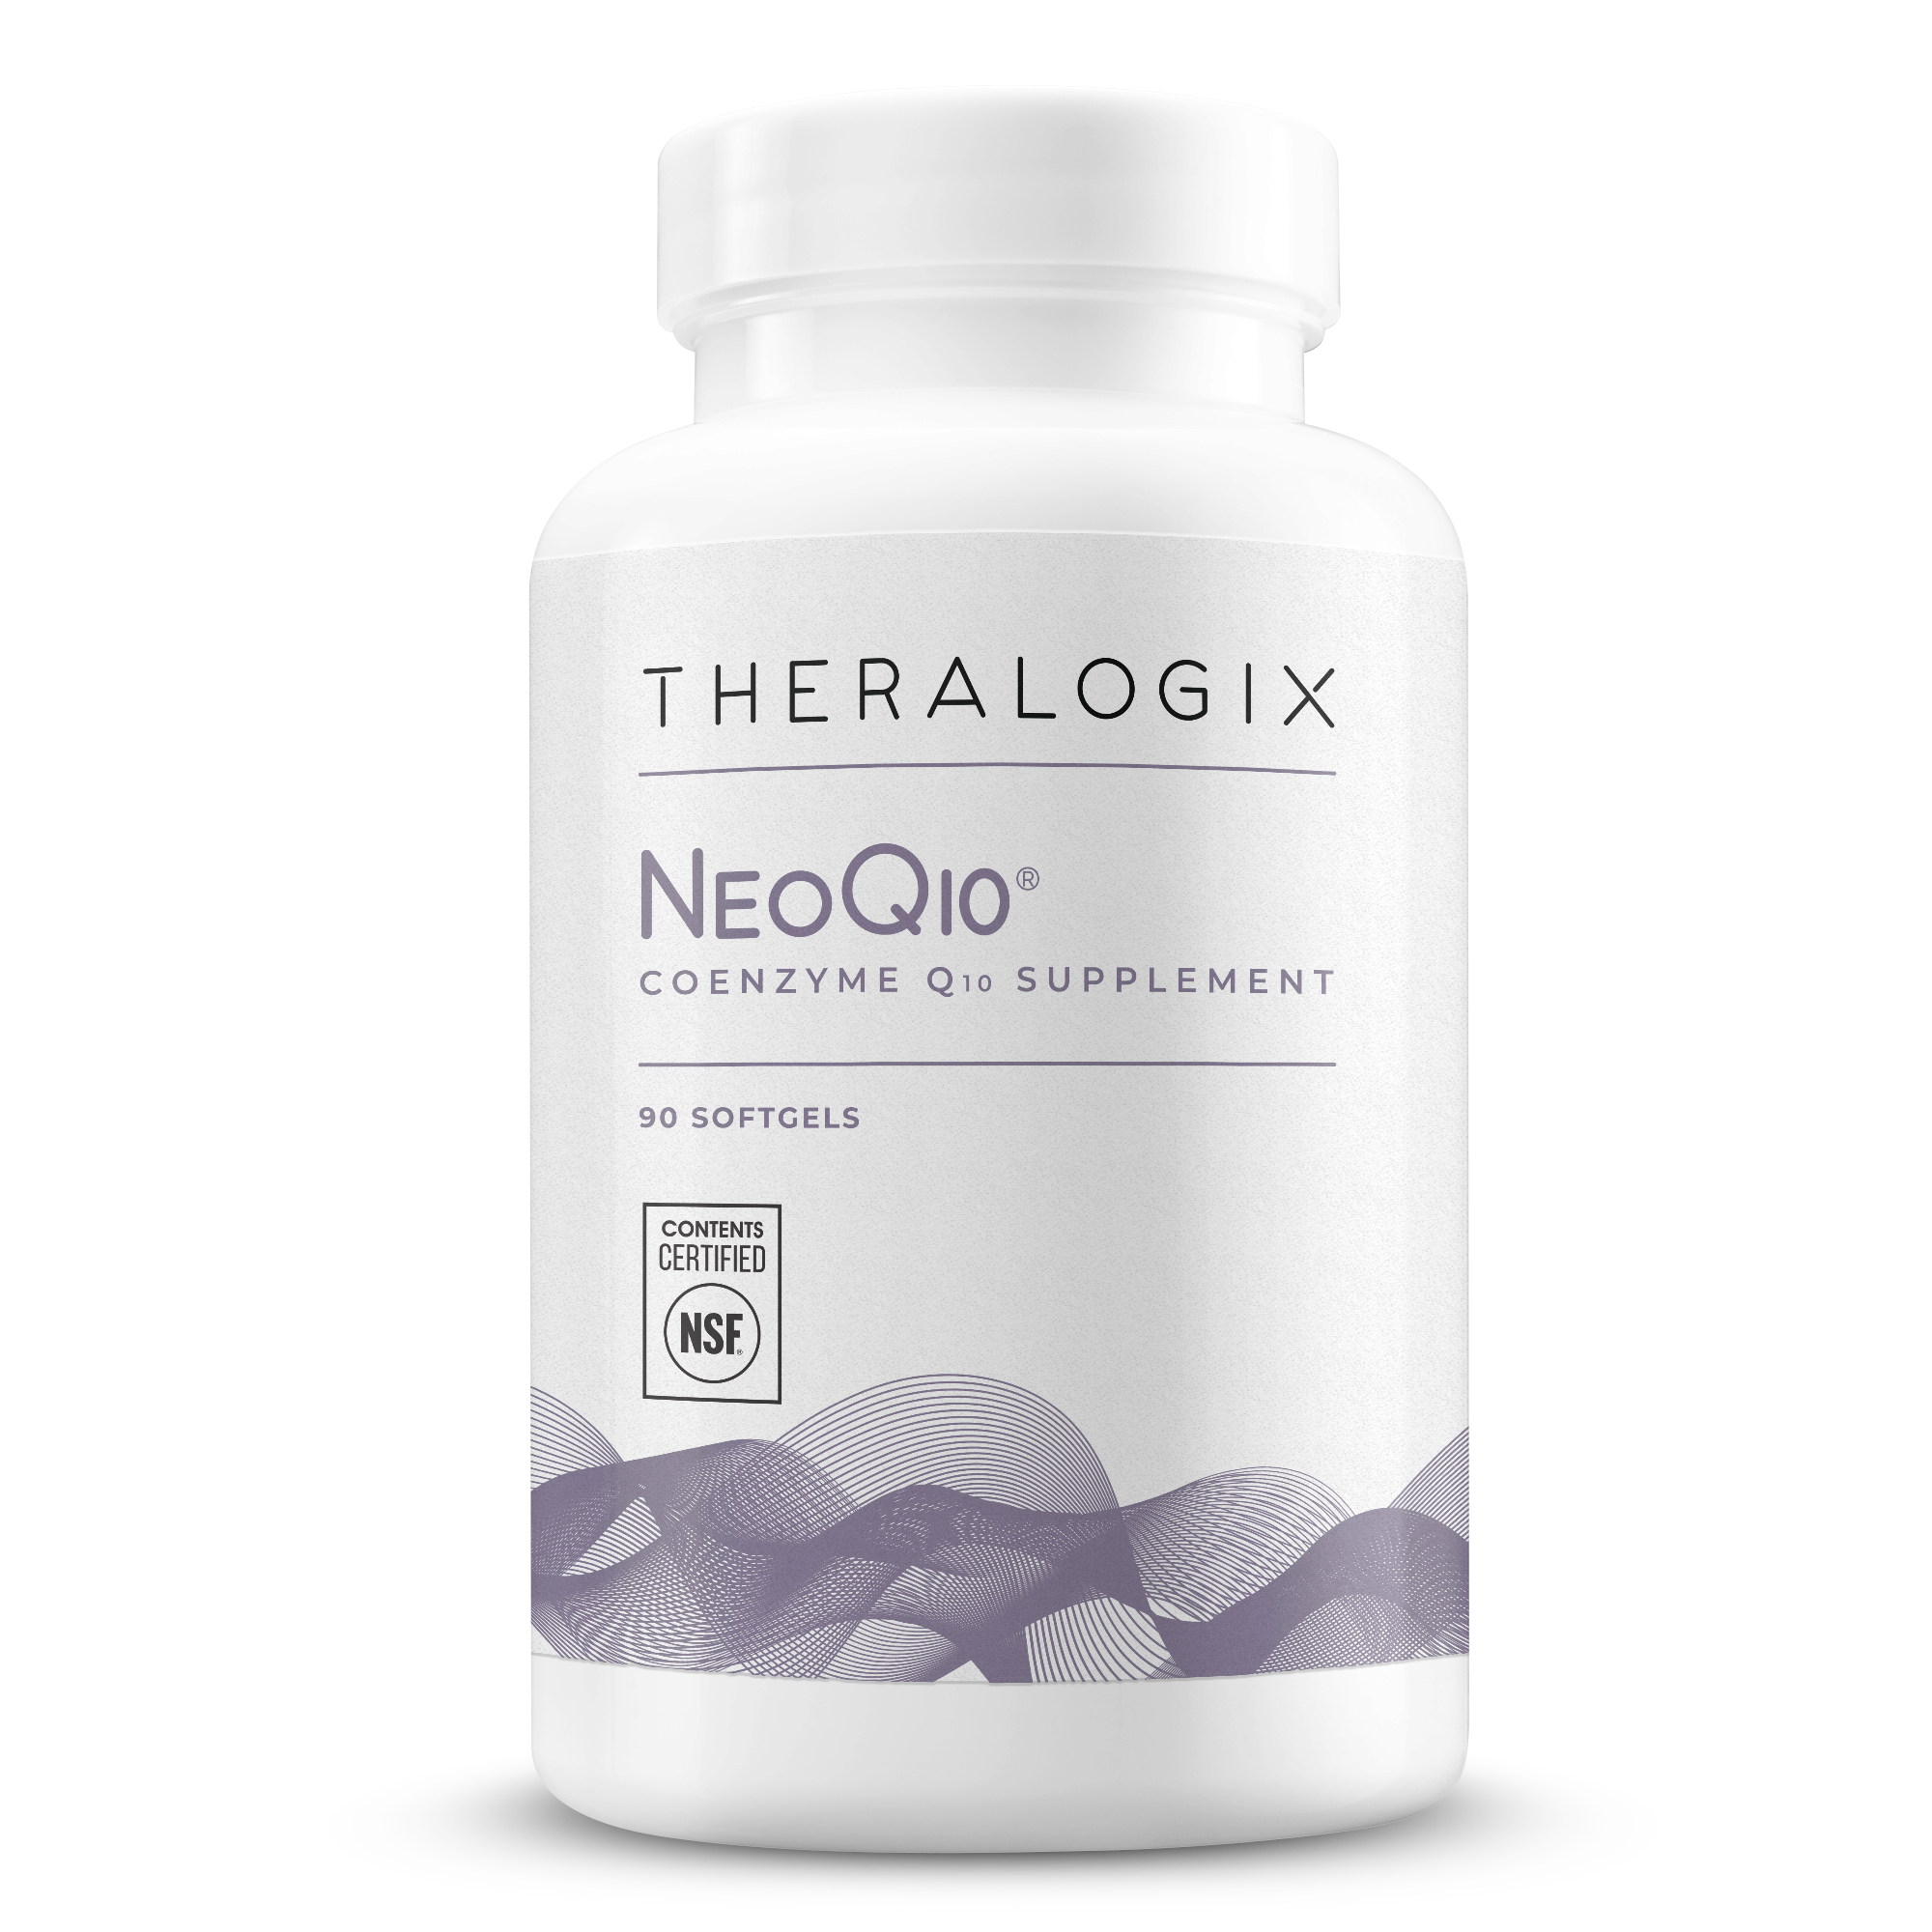 NeoQ10 is an enhanced-absorption coenzyme Q10 (CoQ10) supplement to support heart health, plus male and female fertility.* 